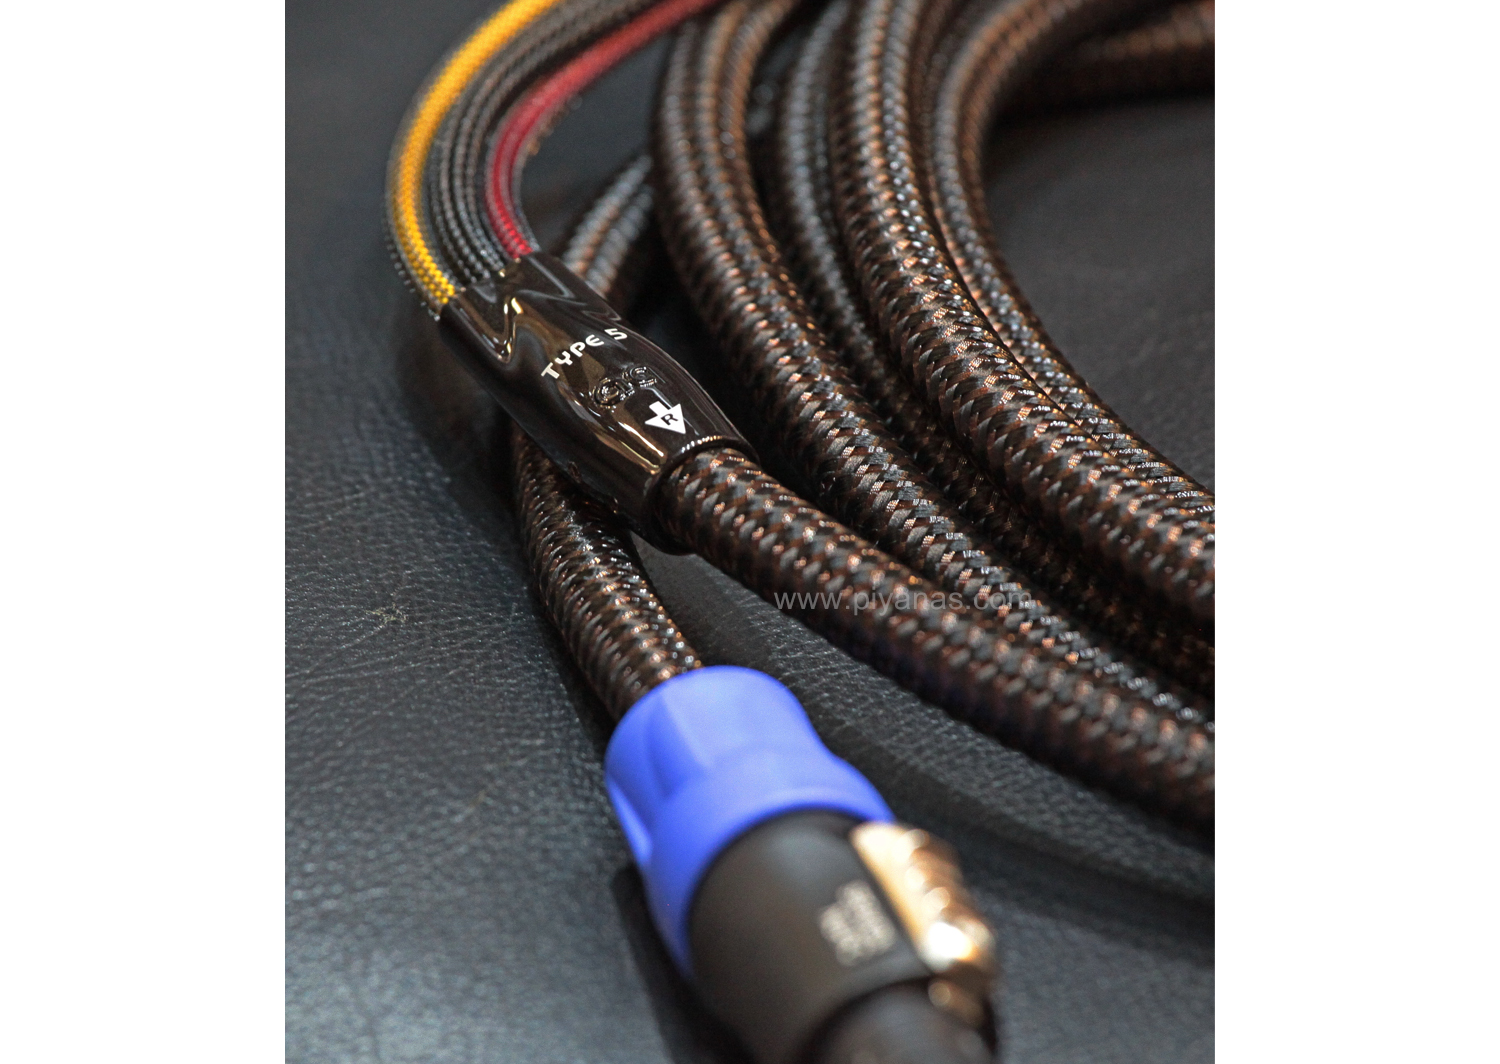 Type-5 (REL Sub Cable) (6.0M)